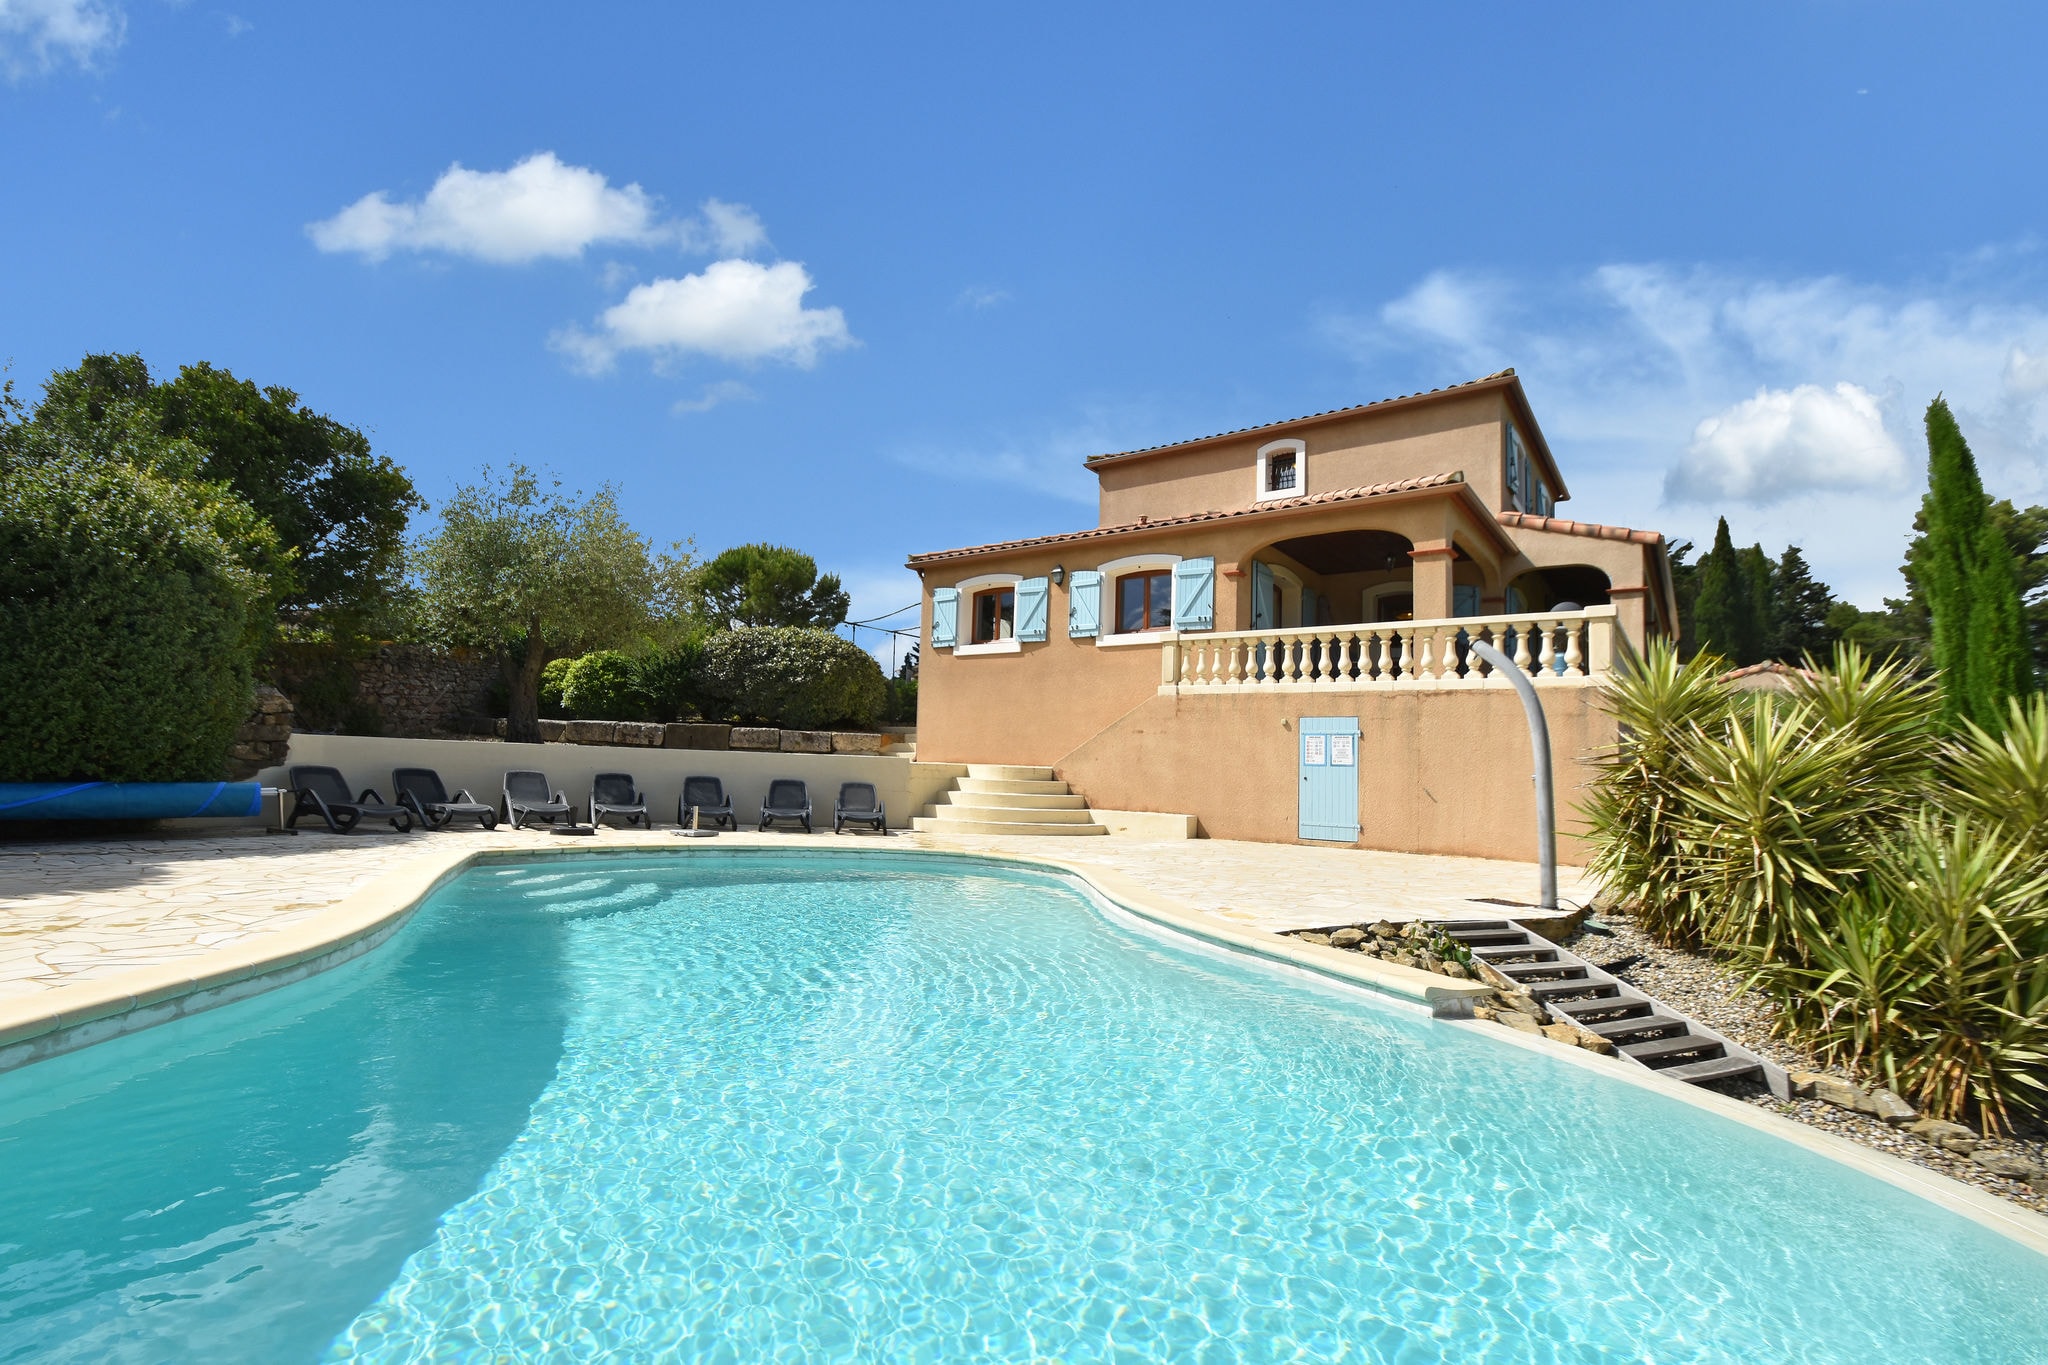 Villa with heated pool, jacuzzi, sports field and stunning views